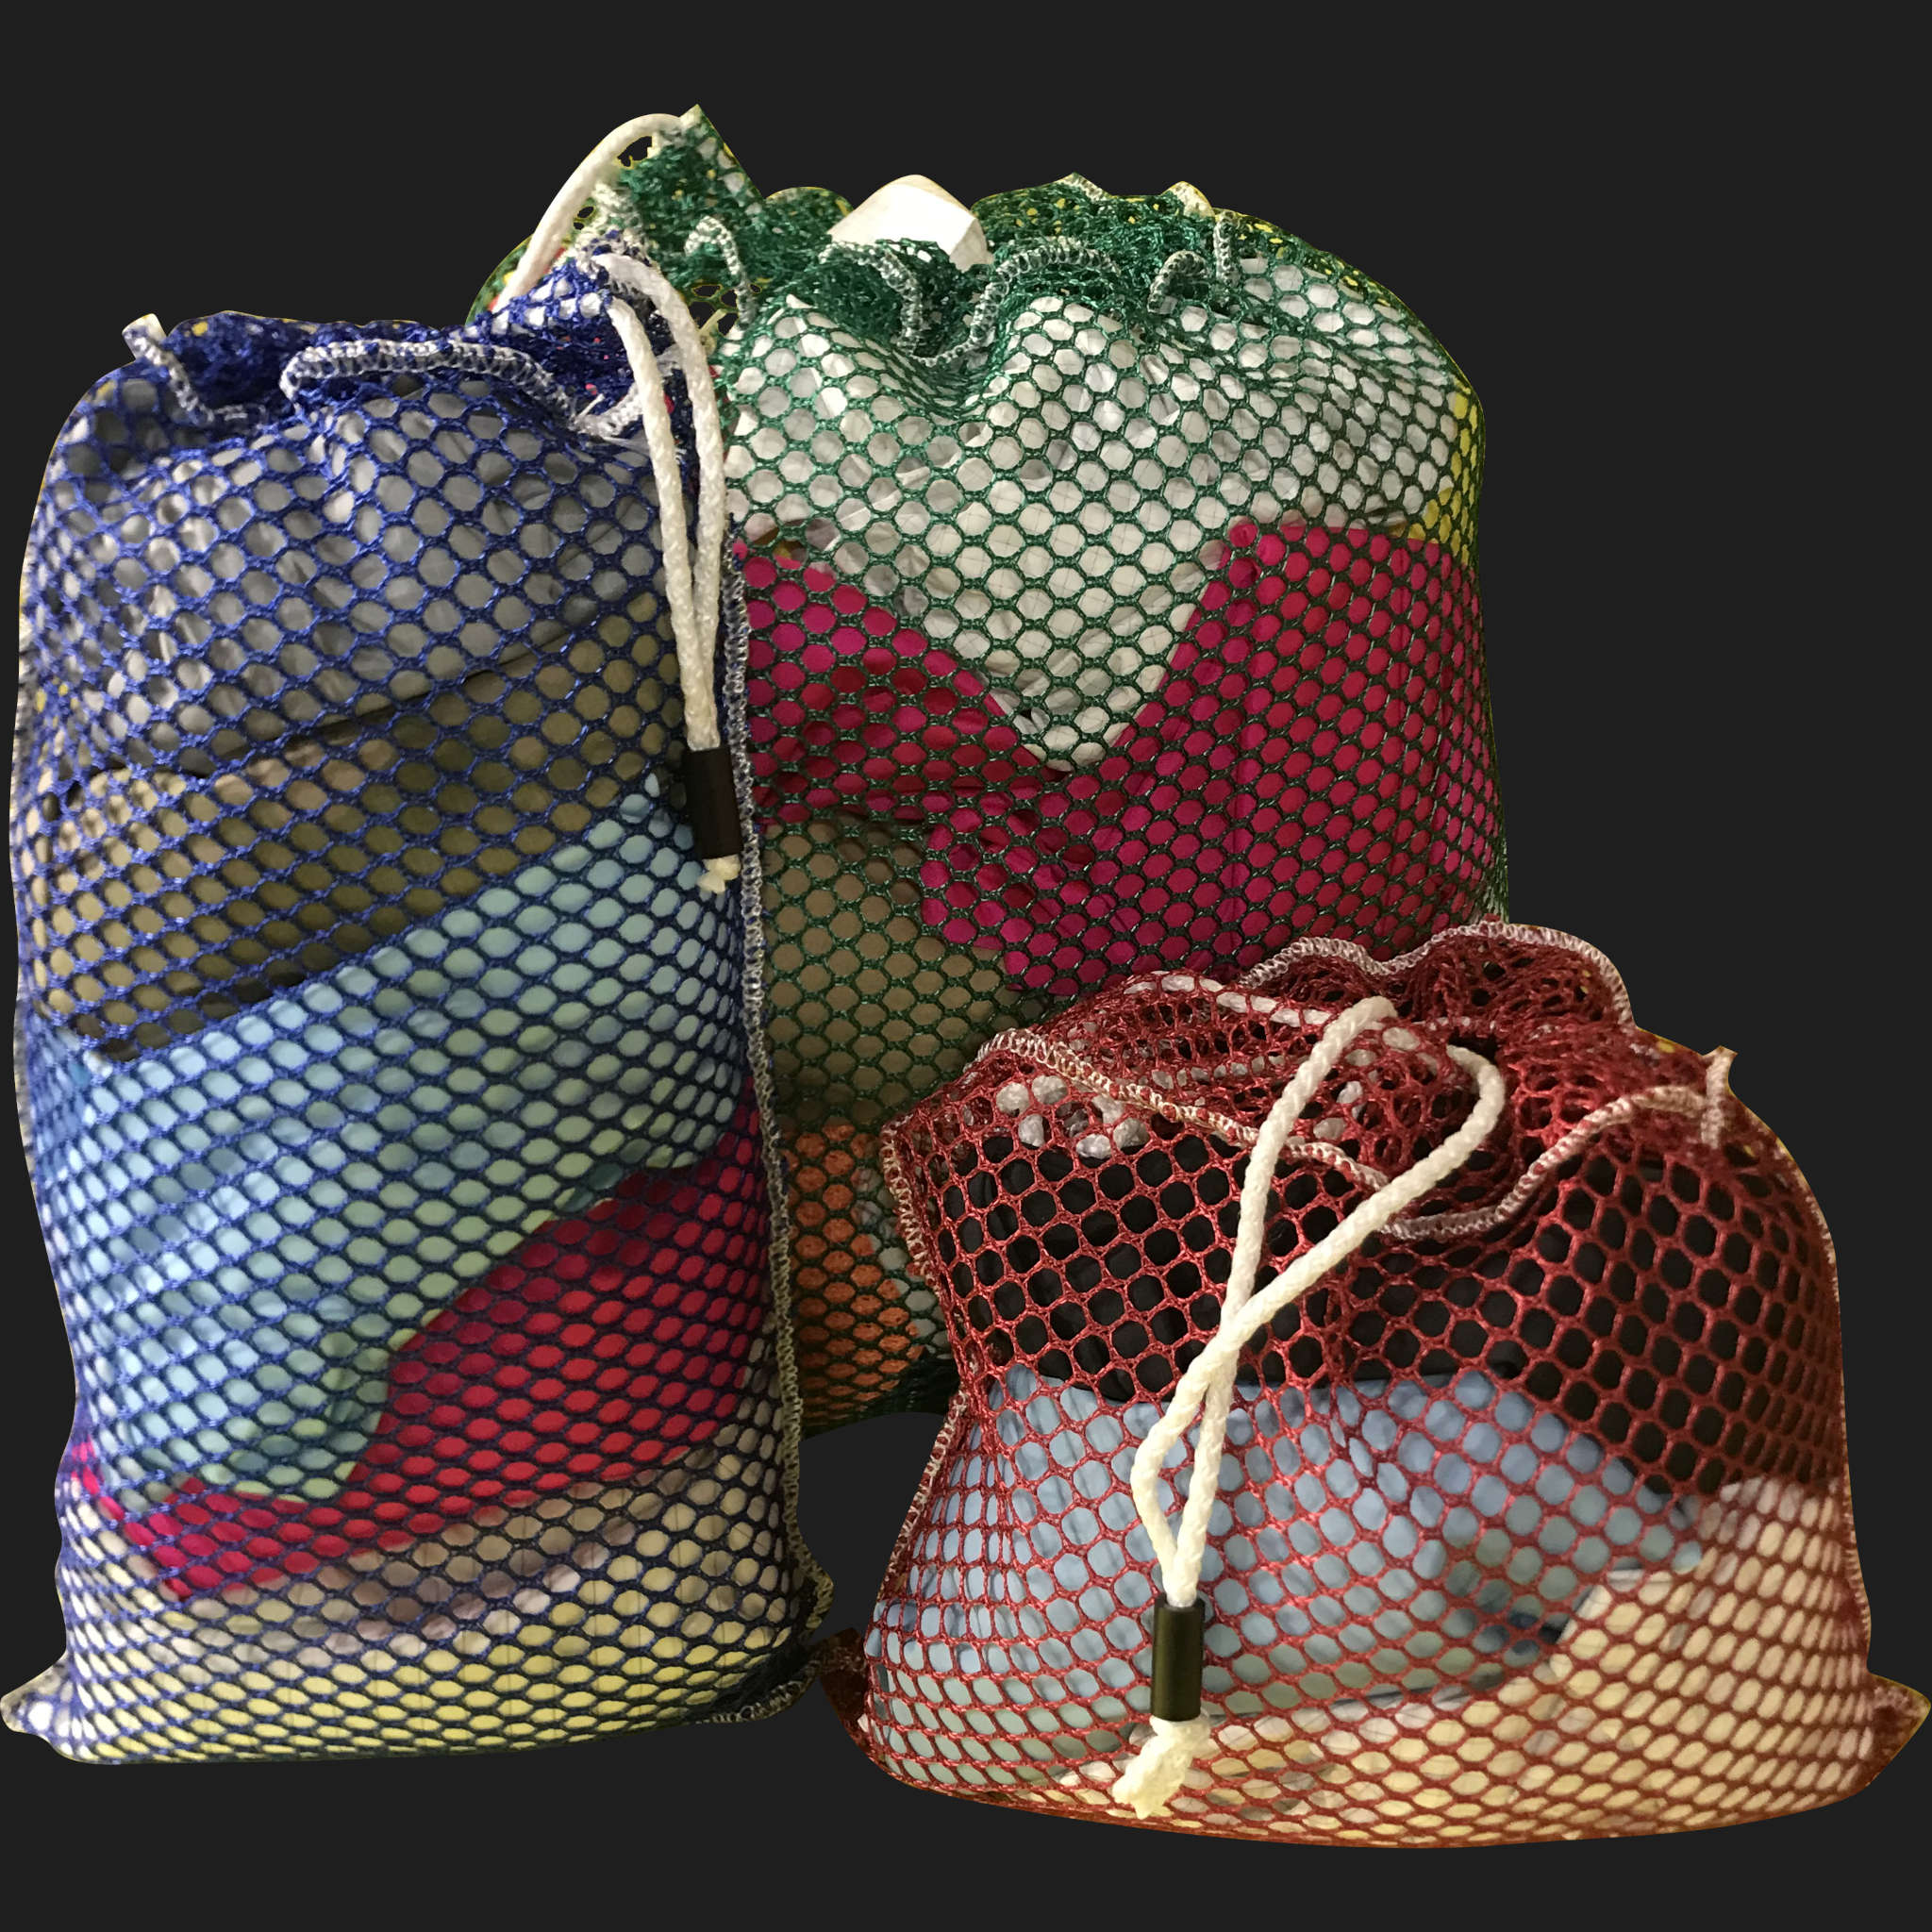 40" x 66" Customized Mesh-Net-Laundry Bags Heavy Duty with Cord and barrellock closure